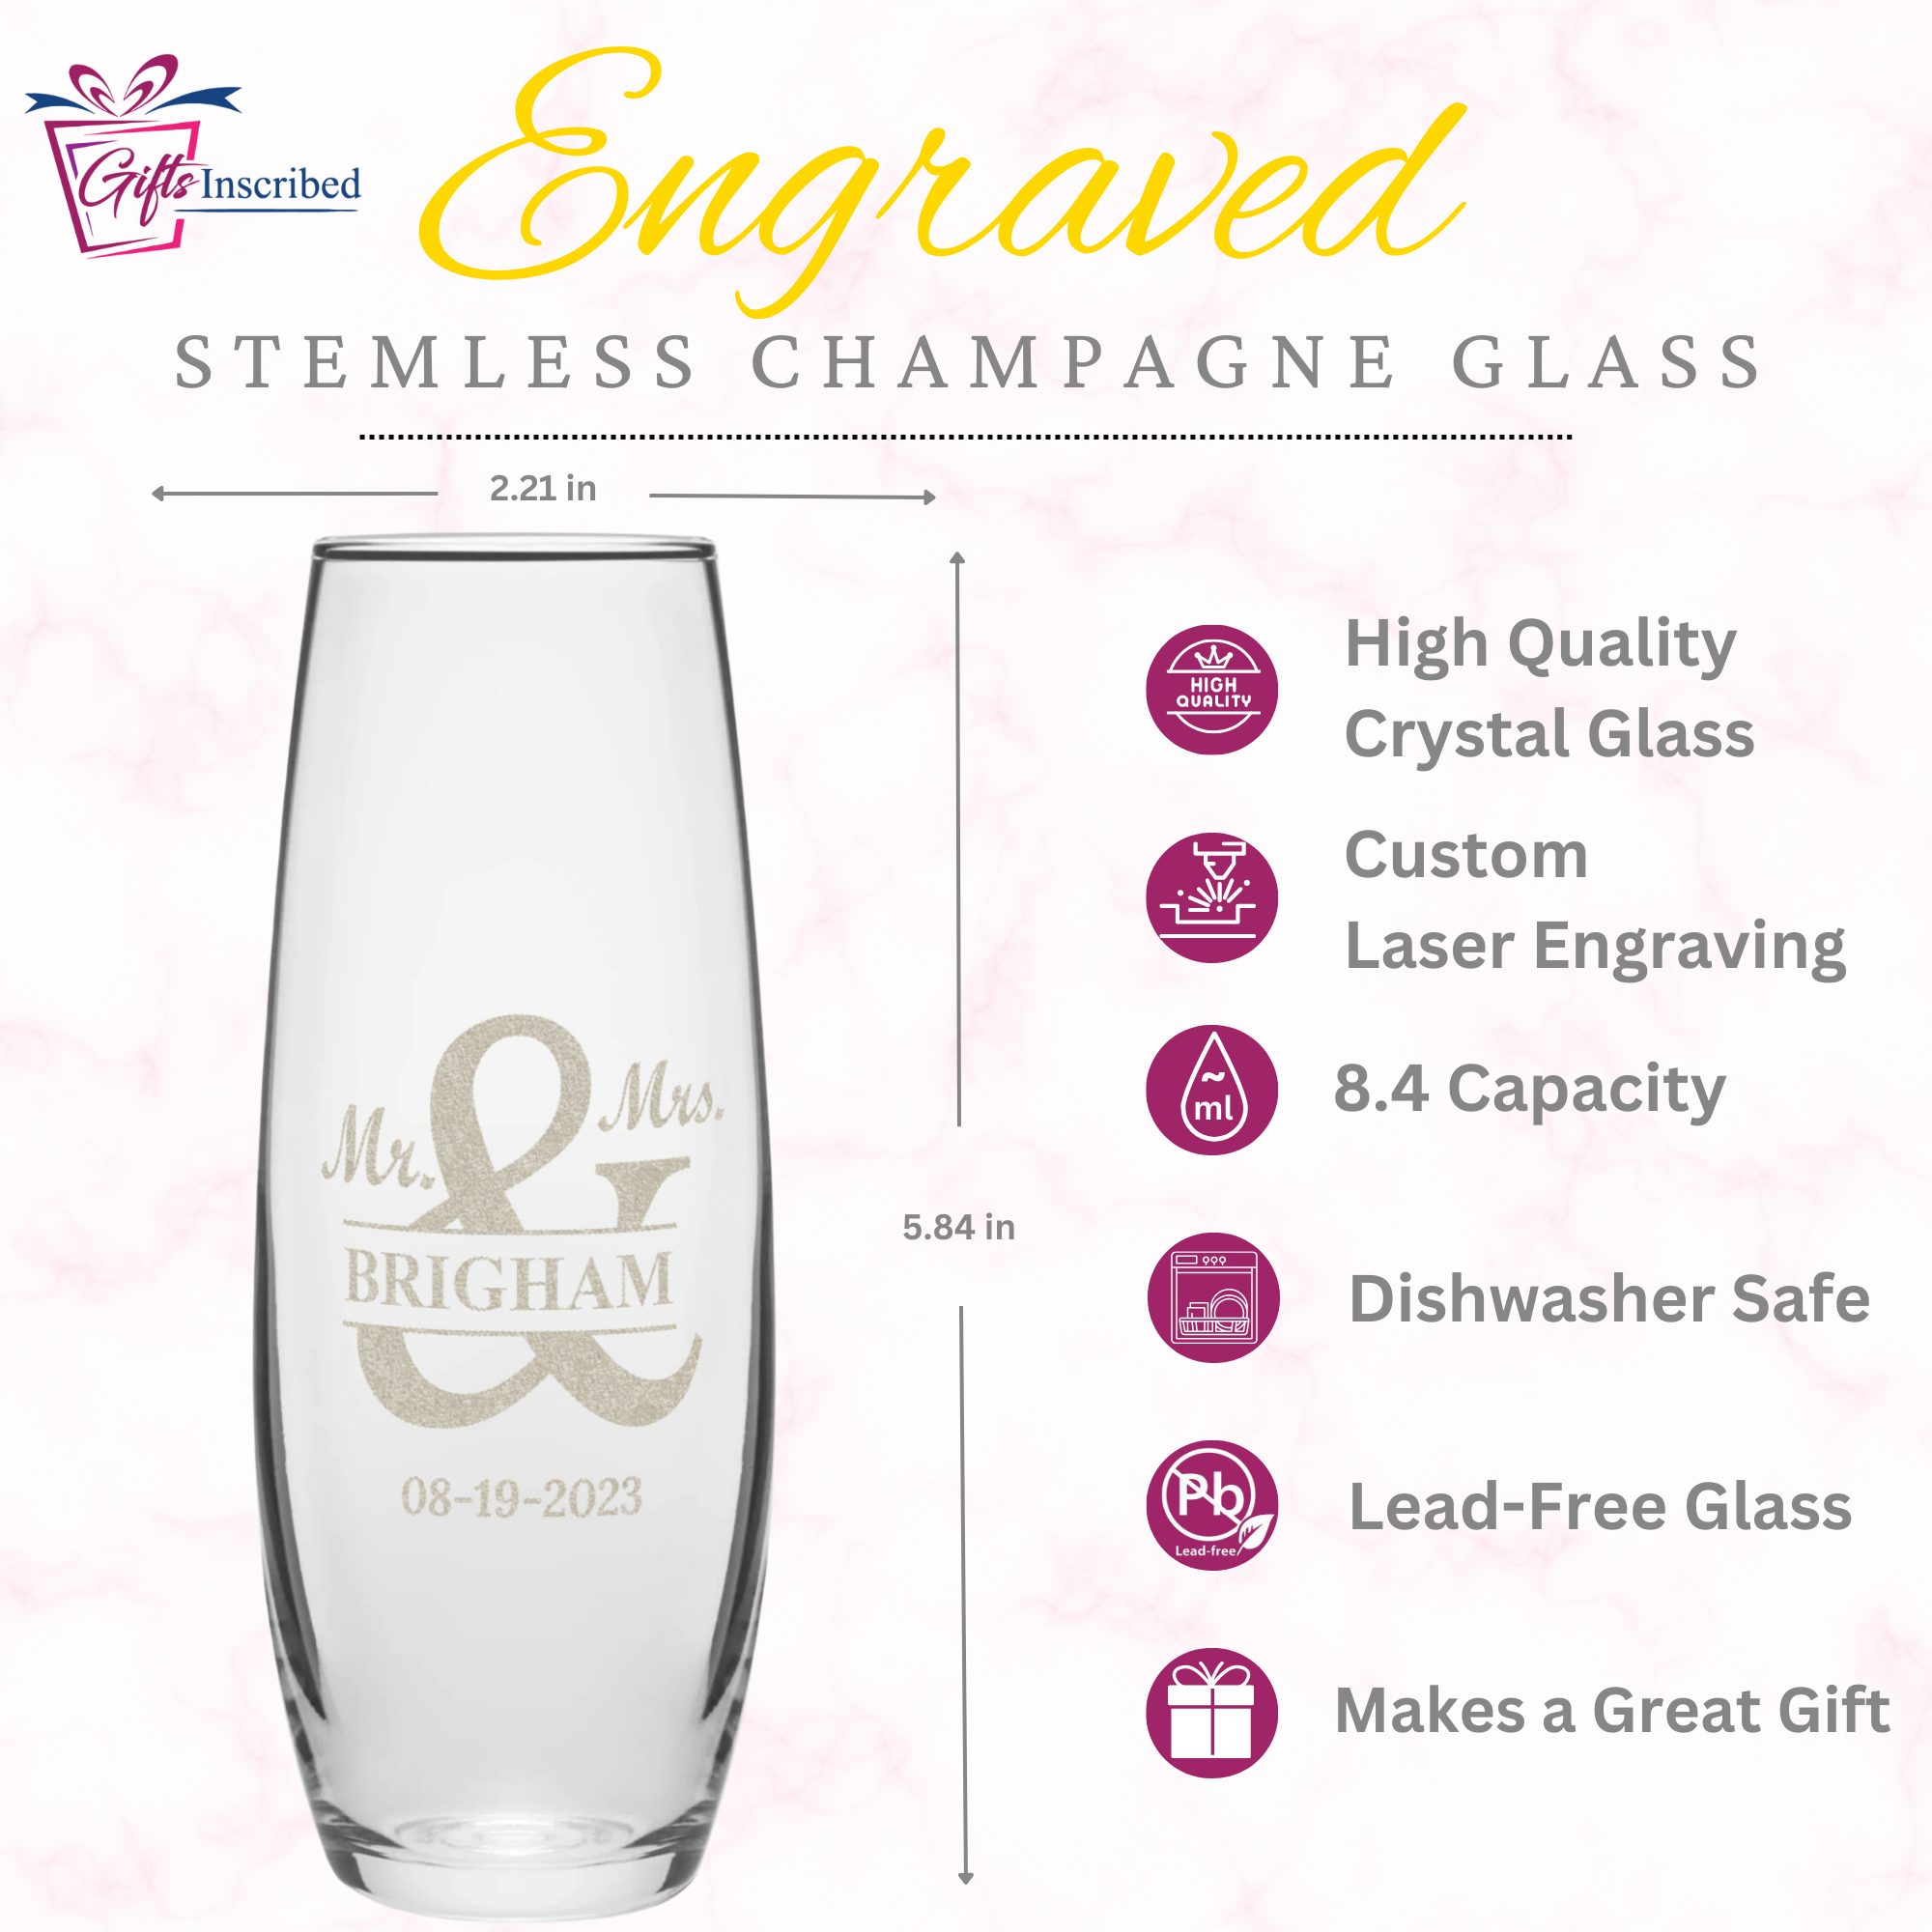 https://giftsinscribed.com/wp-content/uploads/Stemless-champagne-infographic-wedding-.png